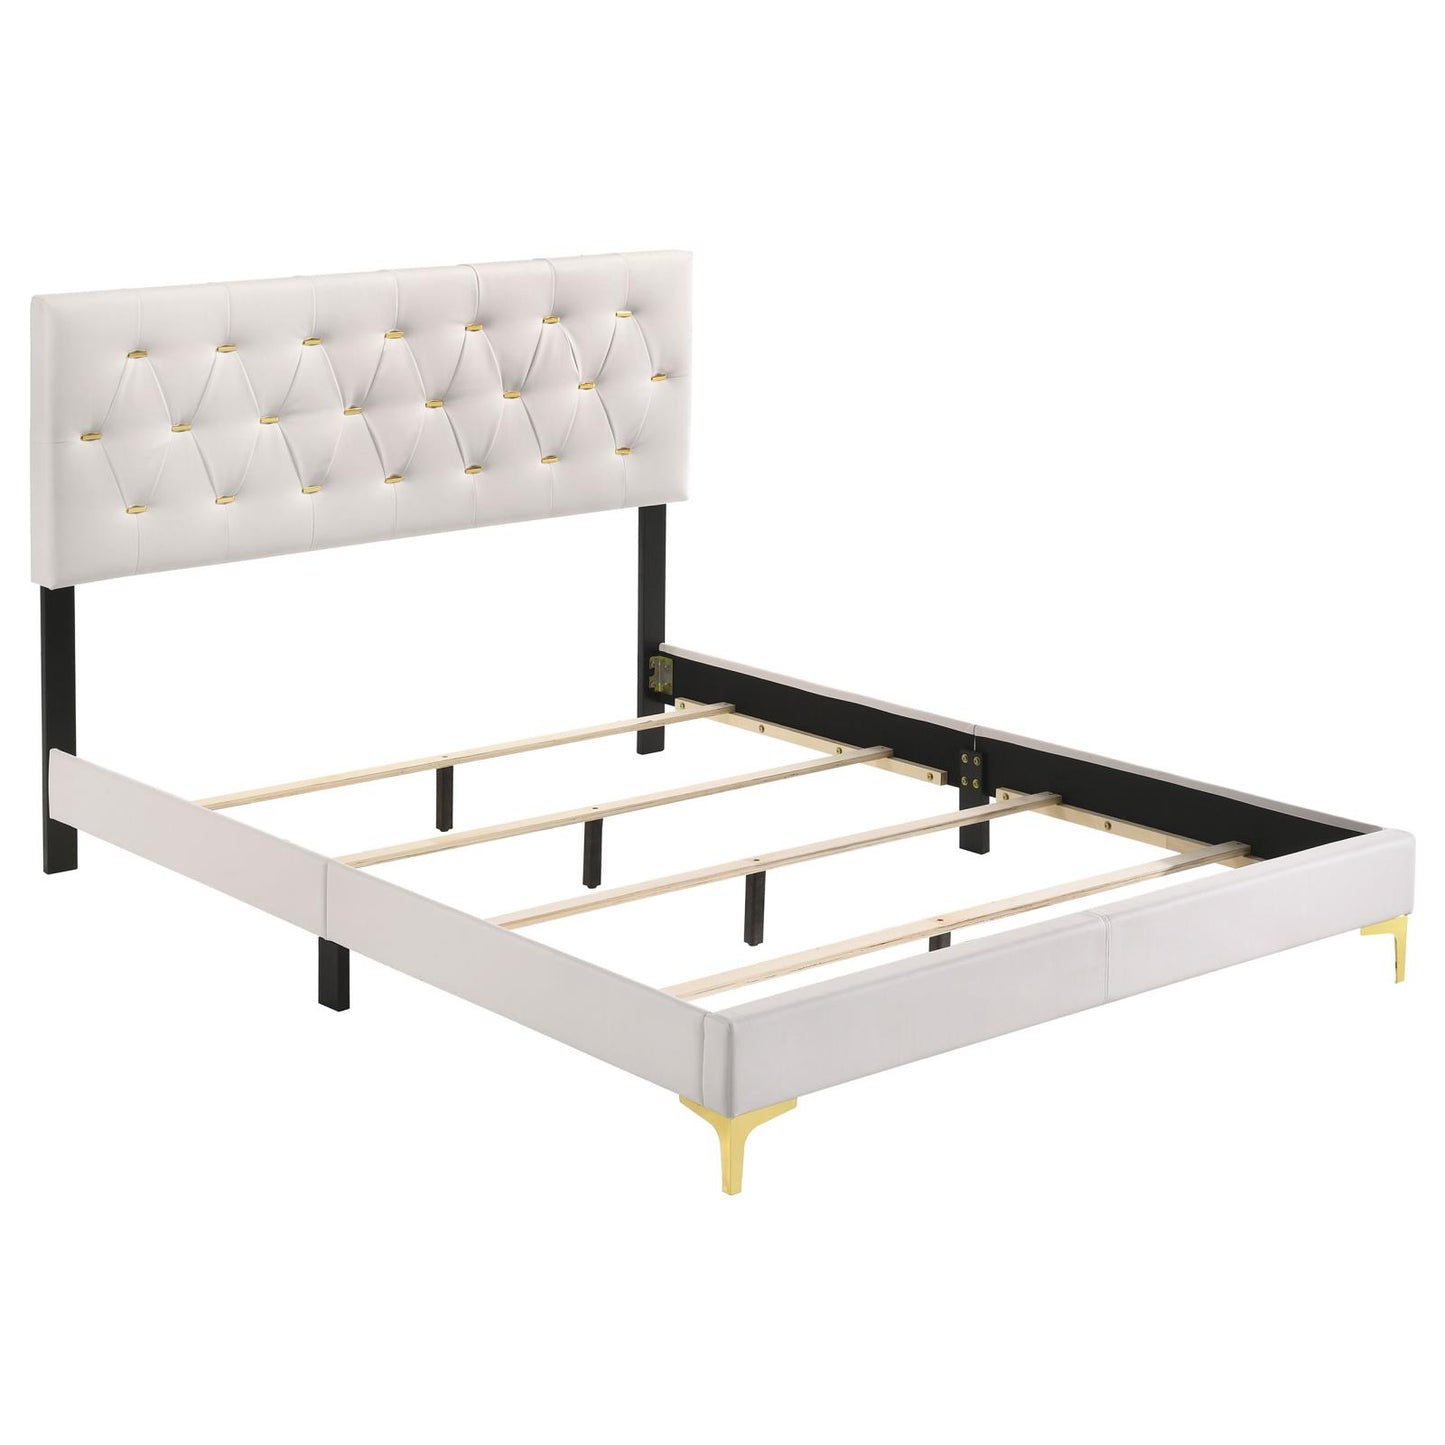 Kendall Tufted Upholstered Panel Queen Bed White